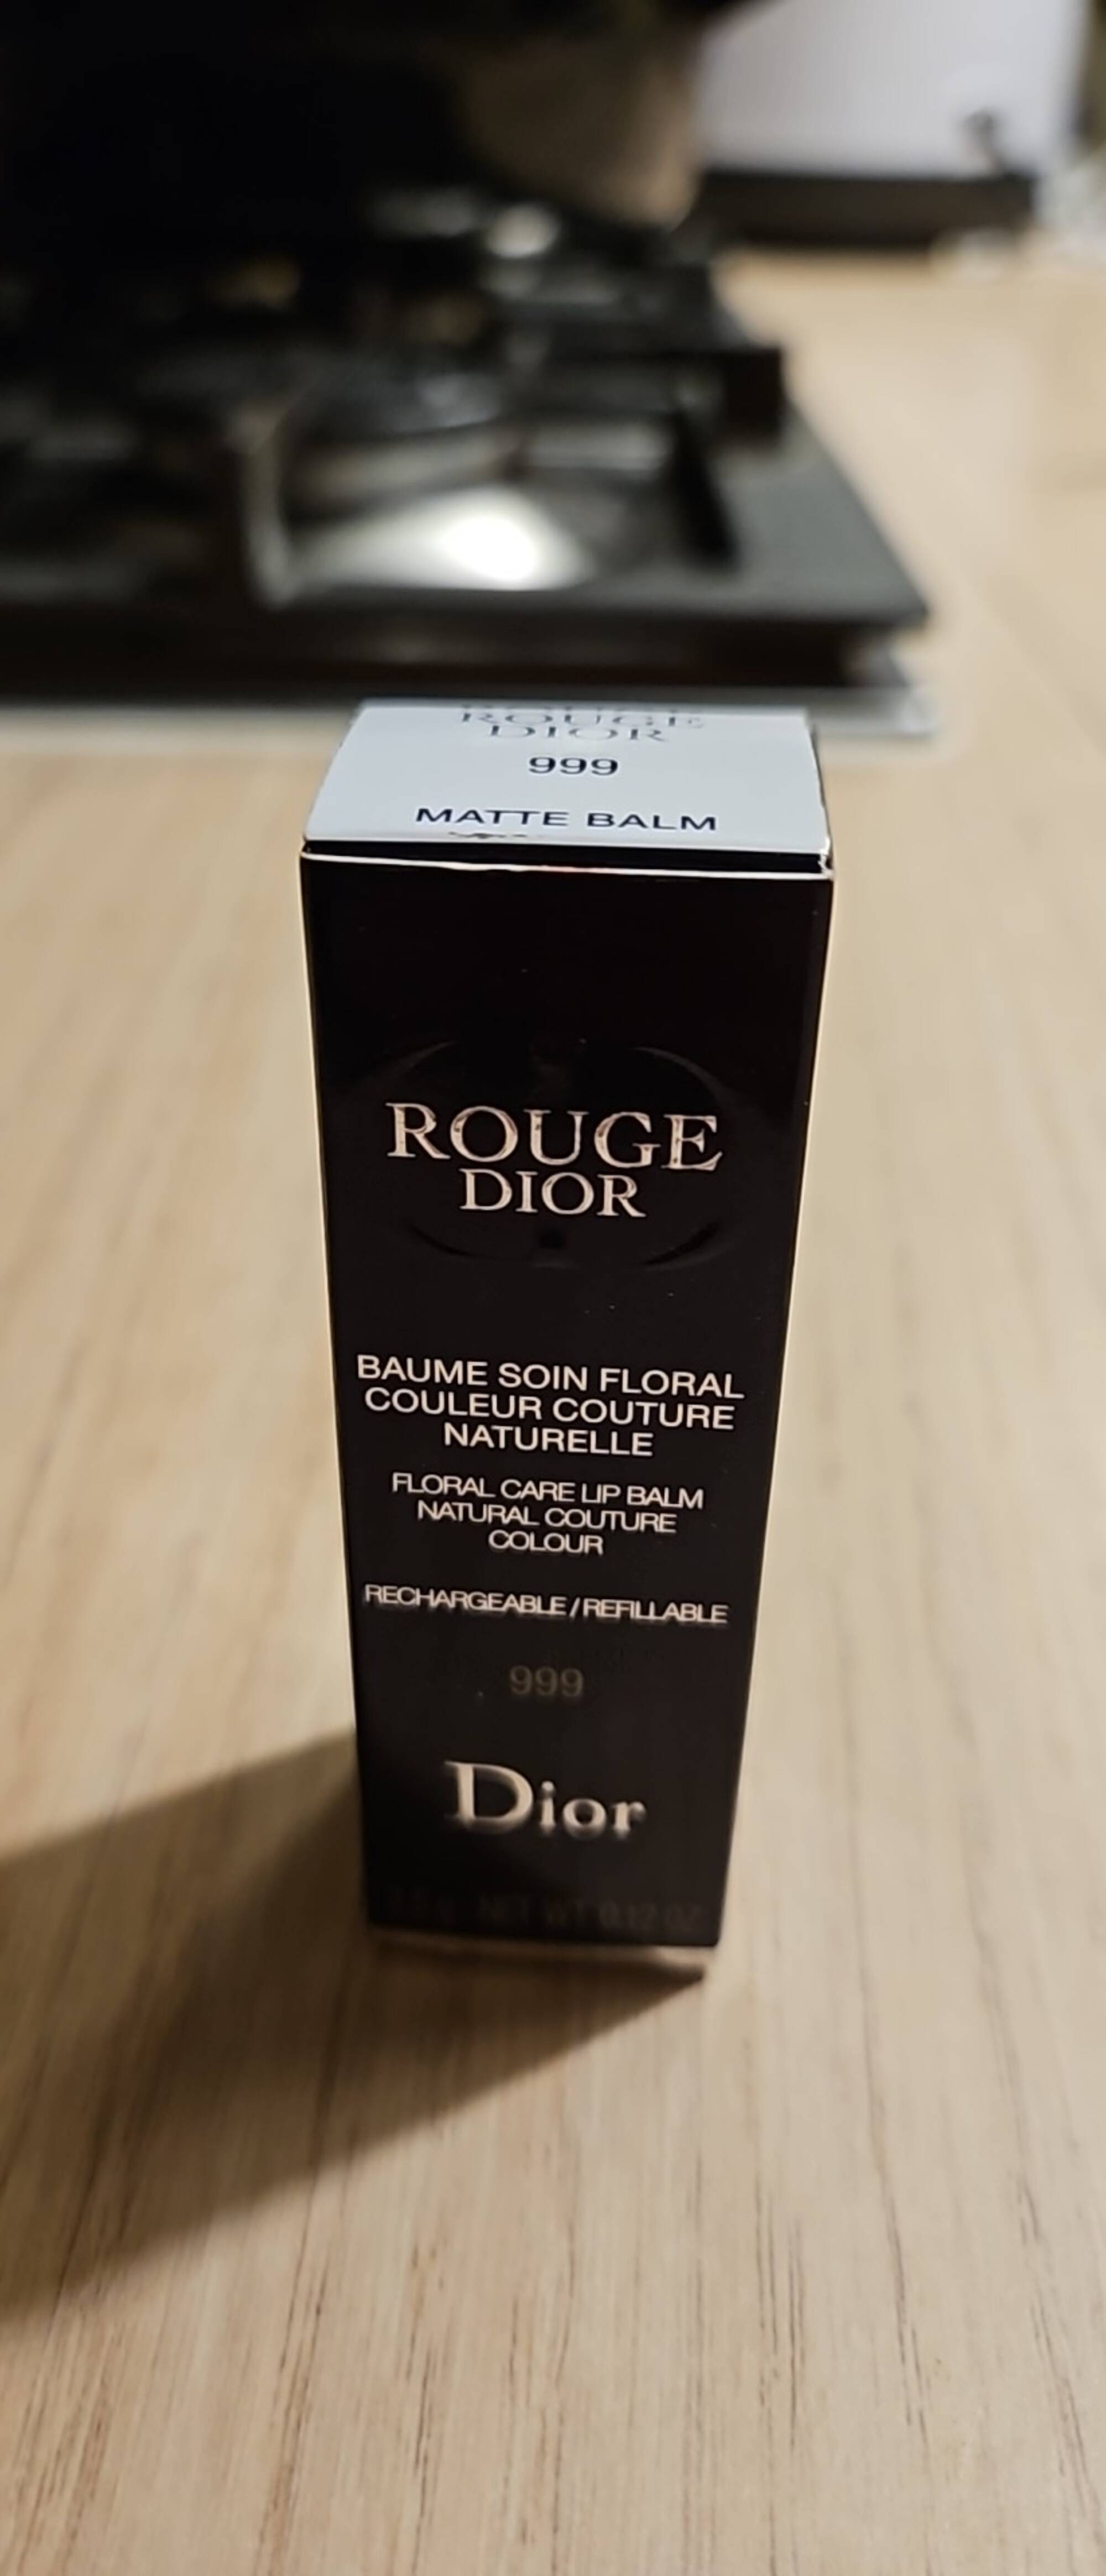 DIOR - Rouge Dior - Baume soin floral couleur couture naturelle